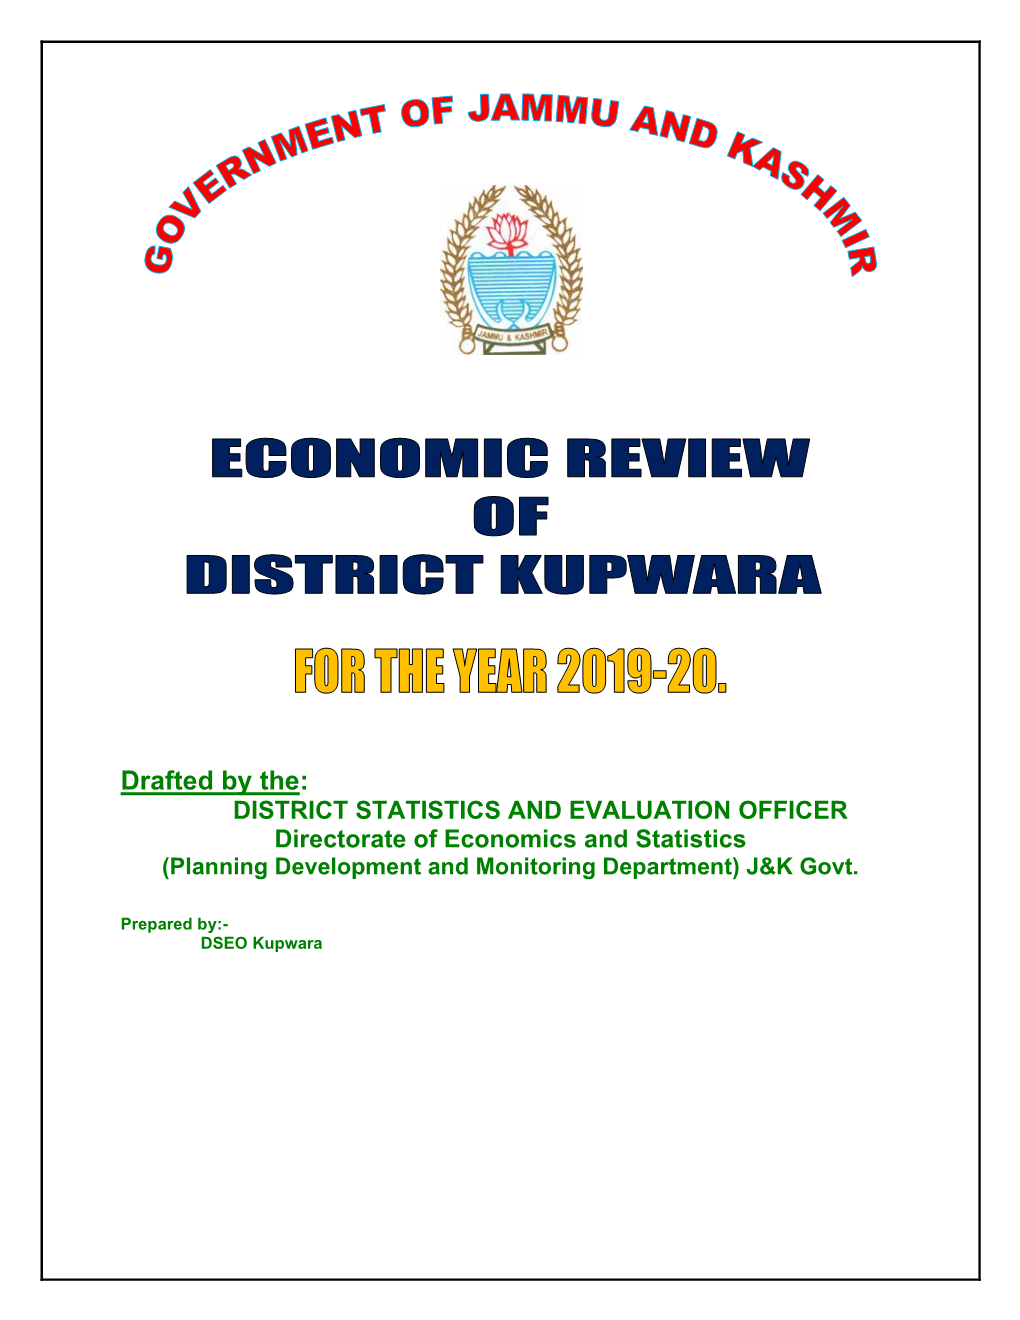 Drafted by The: DISTRICT STATISTICS and EVALUATION OFFICER Directorate of Economics and Statistics (Planning Development and Monitoring Department) J&K Govt